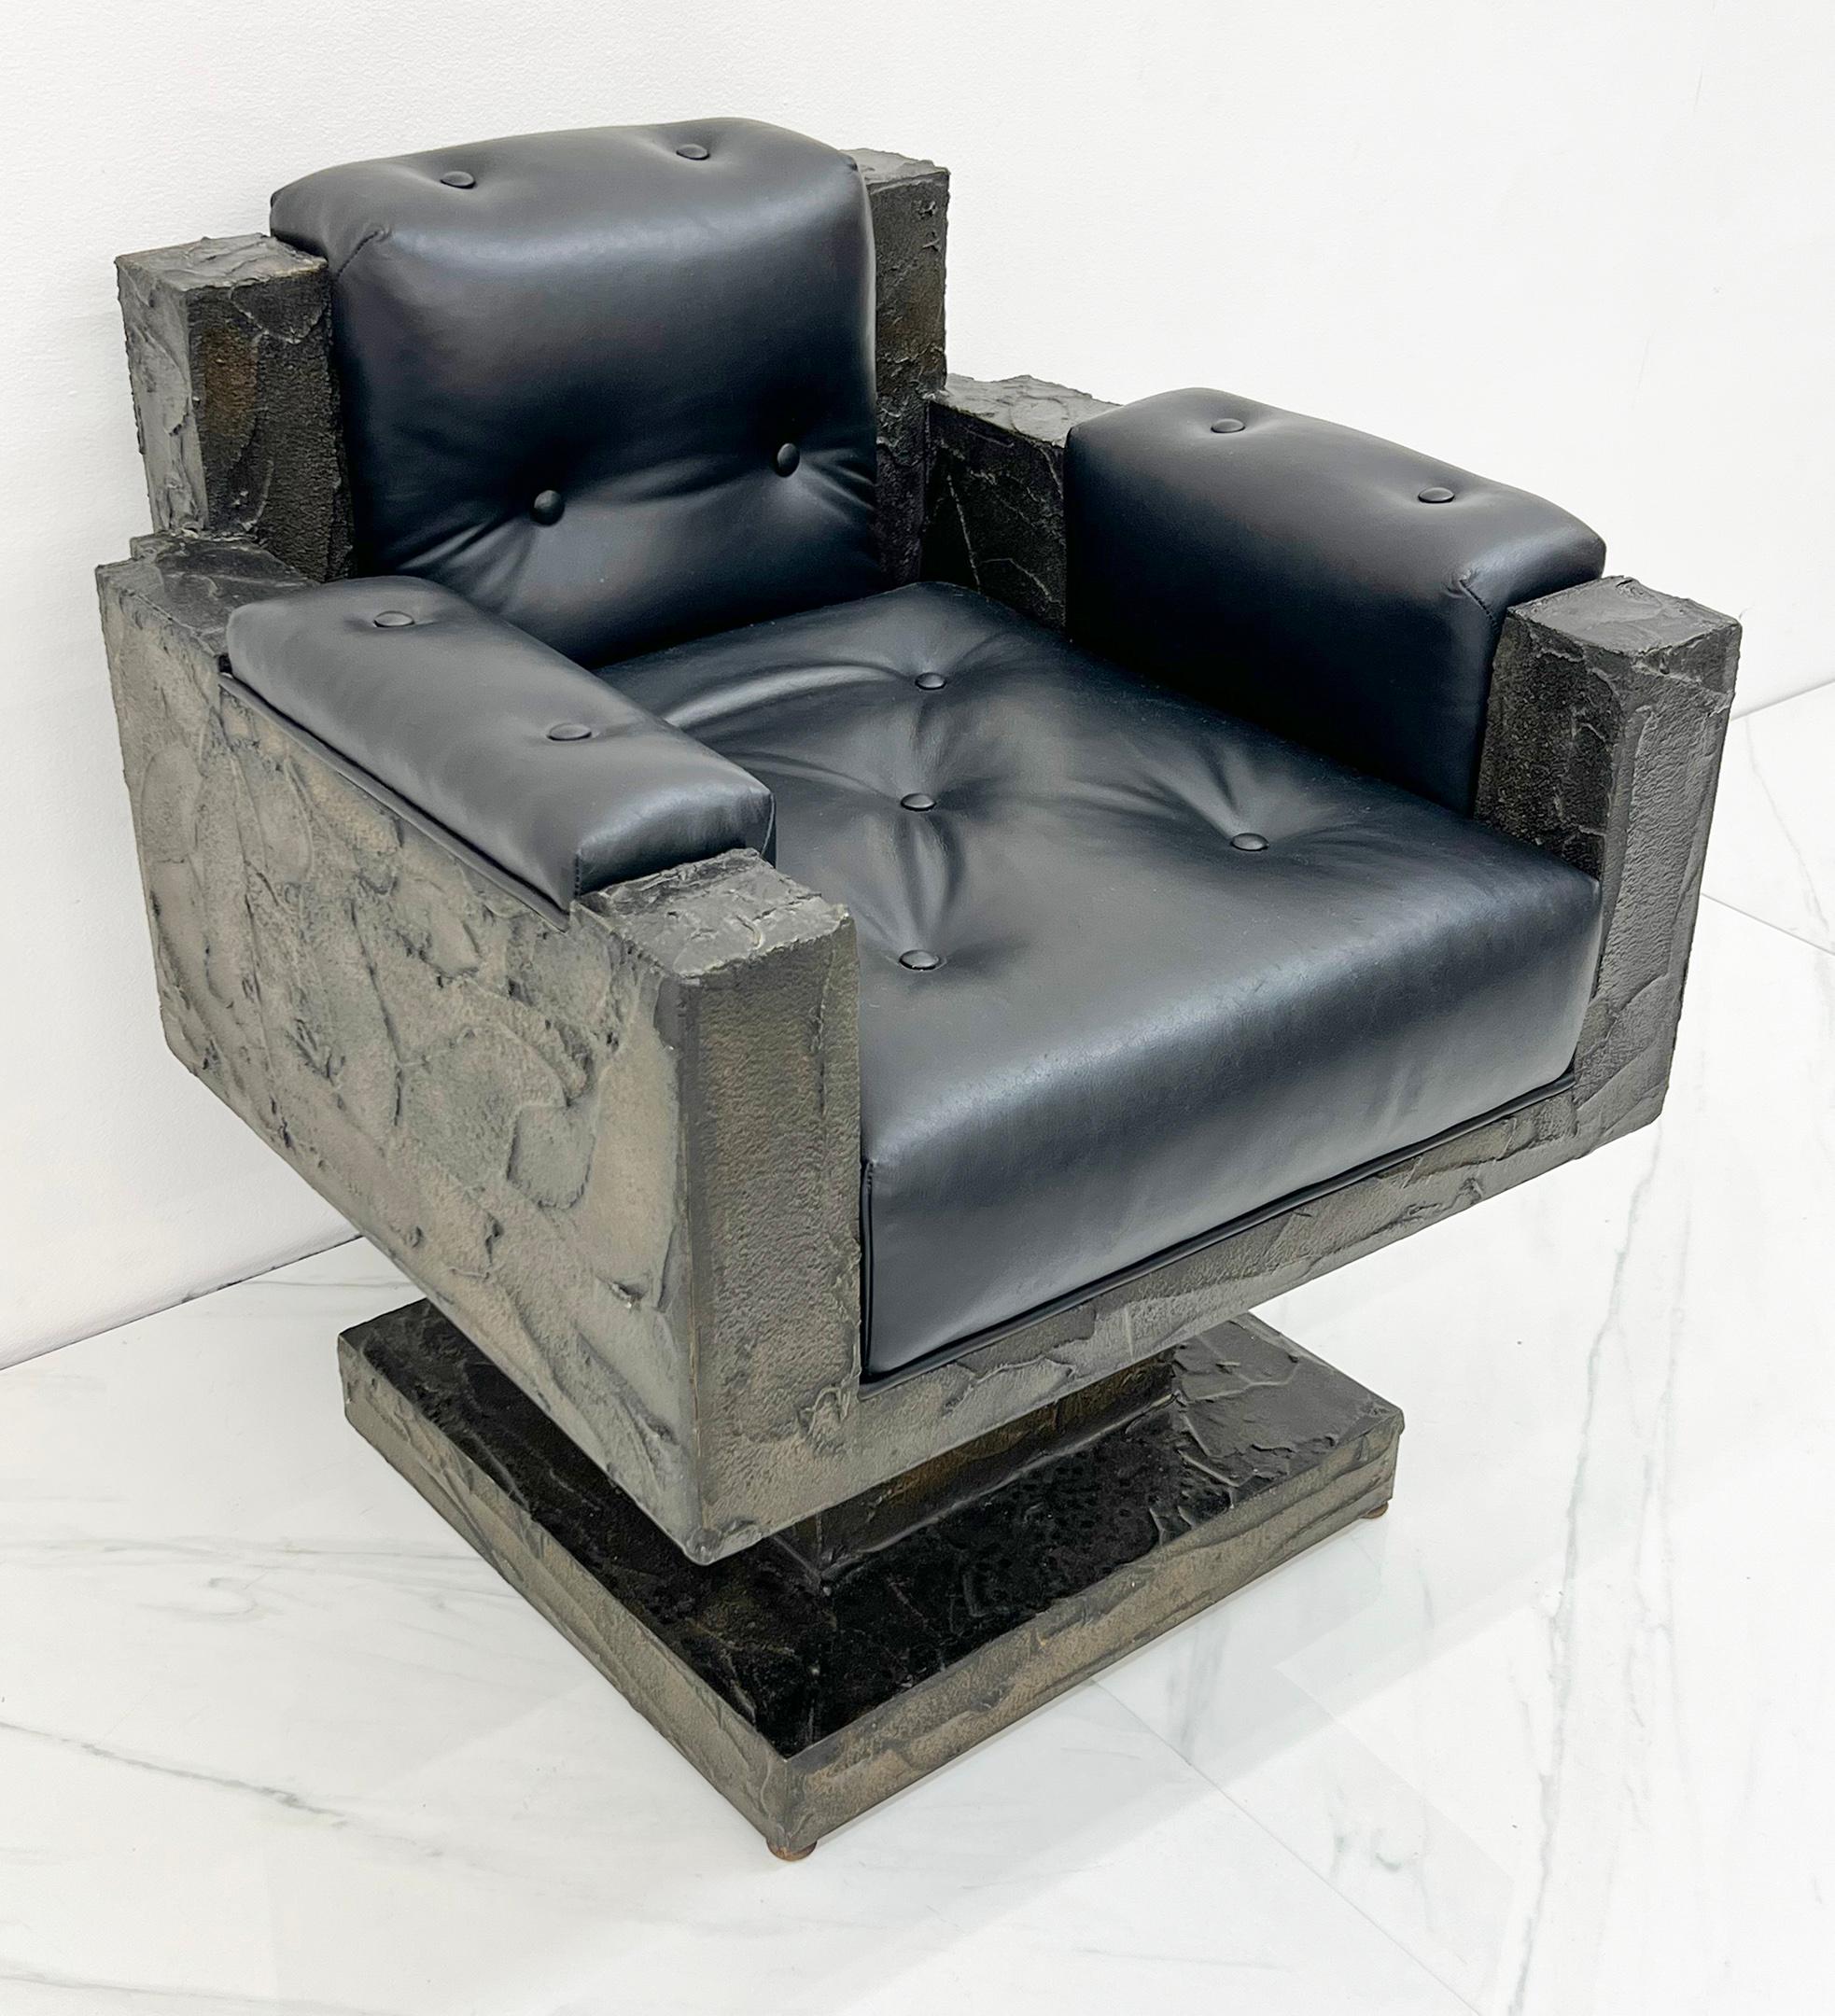 Early Paul Evans Sculpted Bronze Throne Chair, Signed and Dated, 1969 For Sale 1